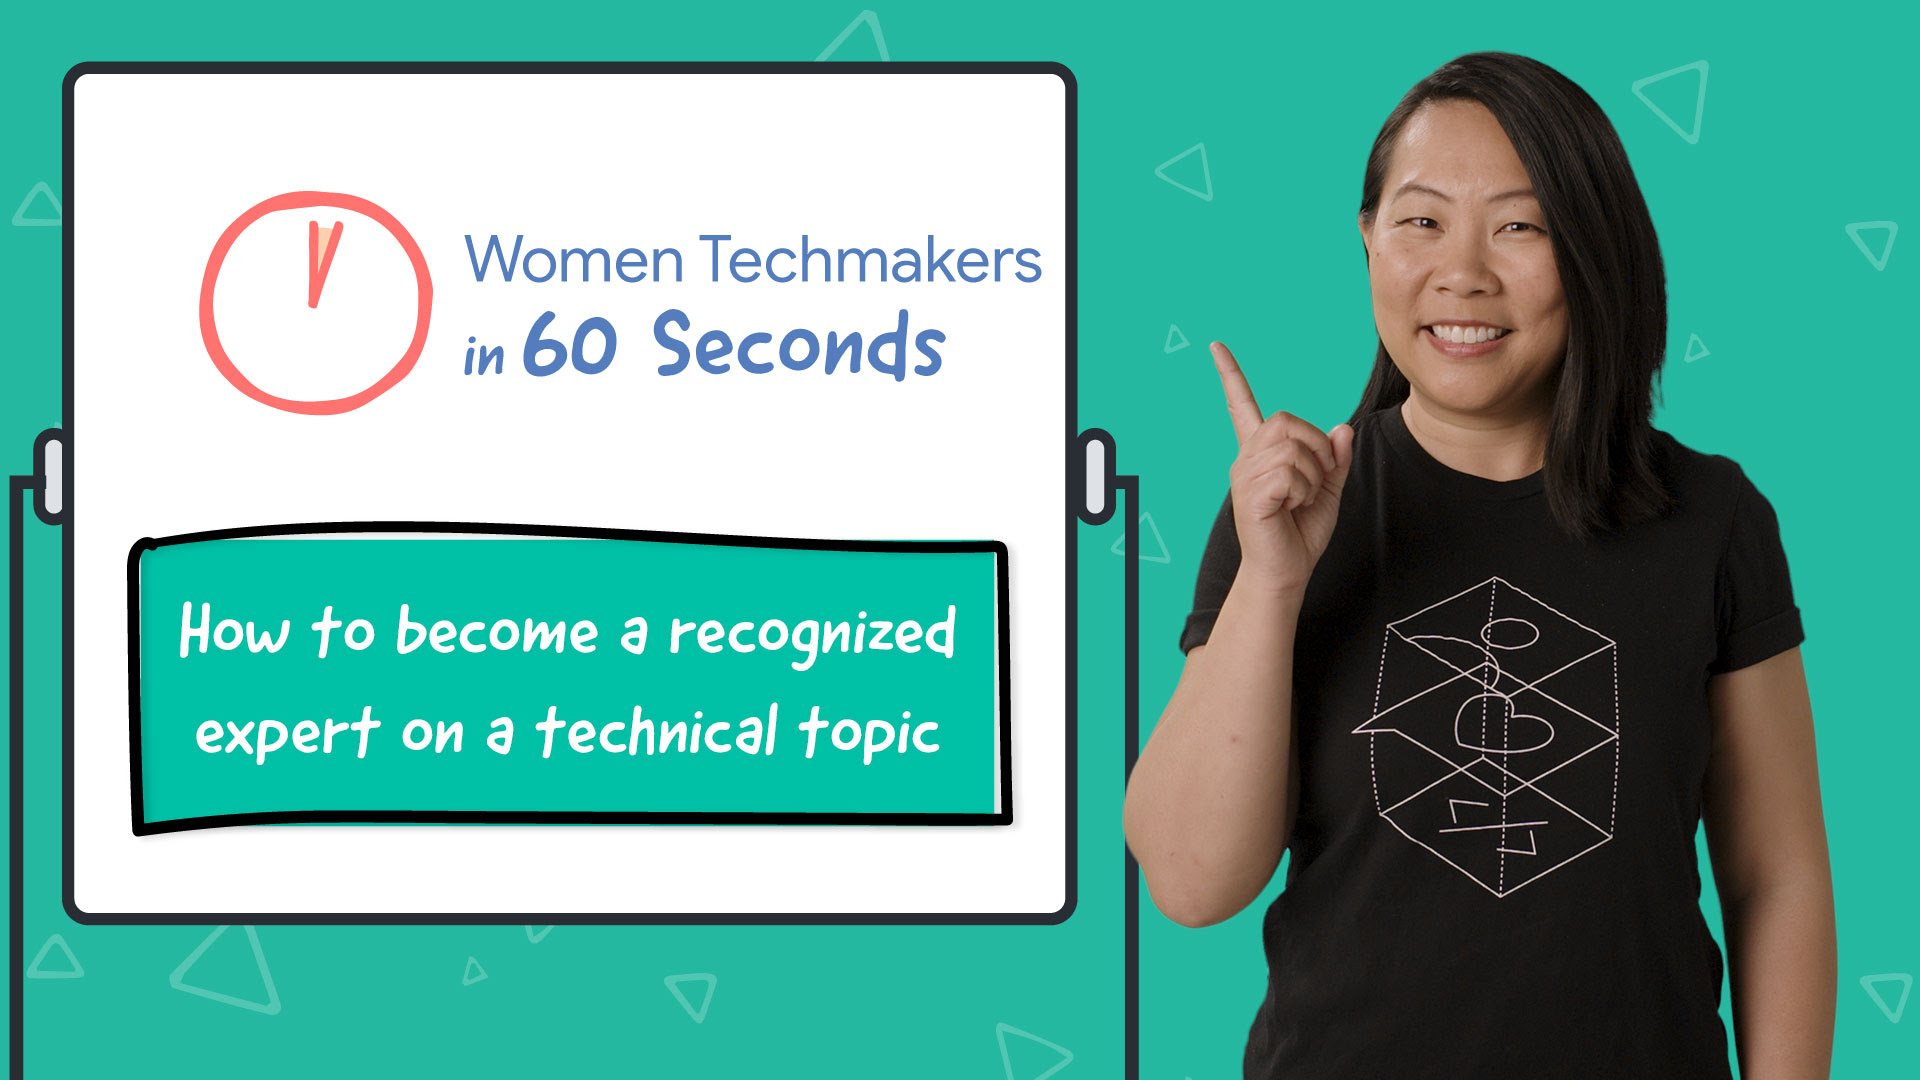 A woman standing in front of a green screen with the text 'How to become a recognized expert on a technical topi